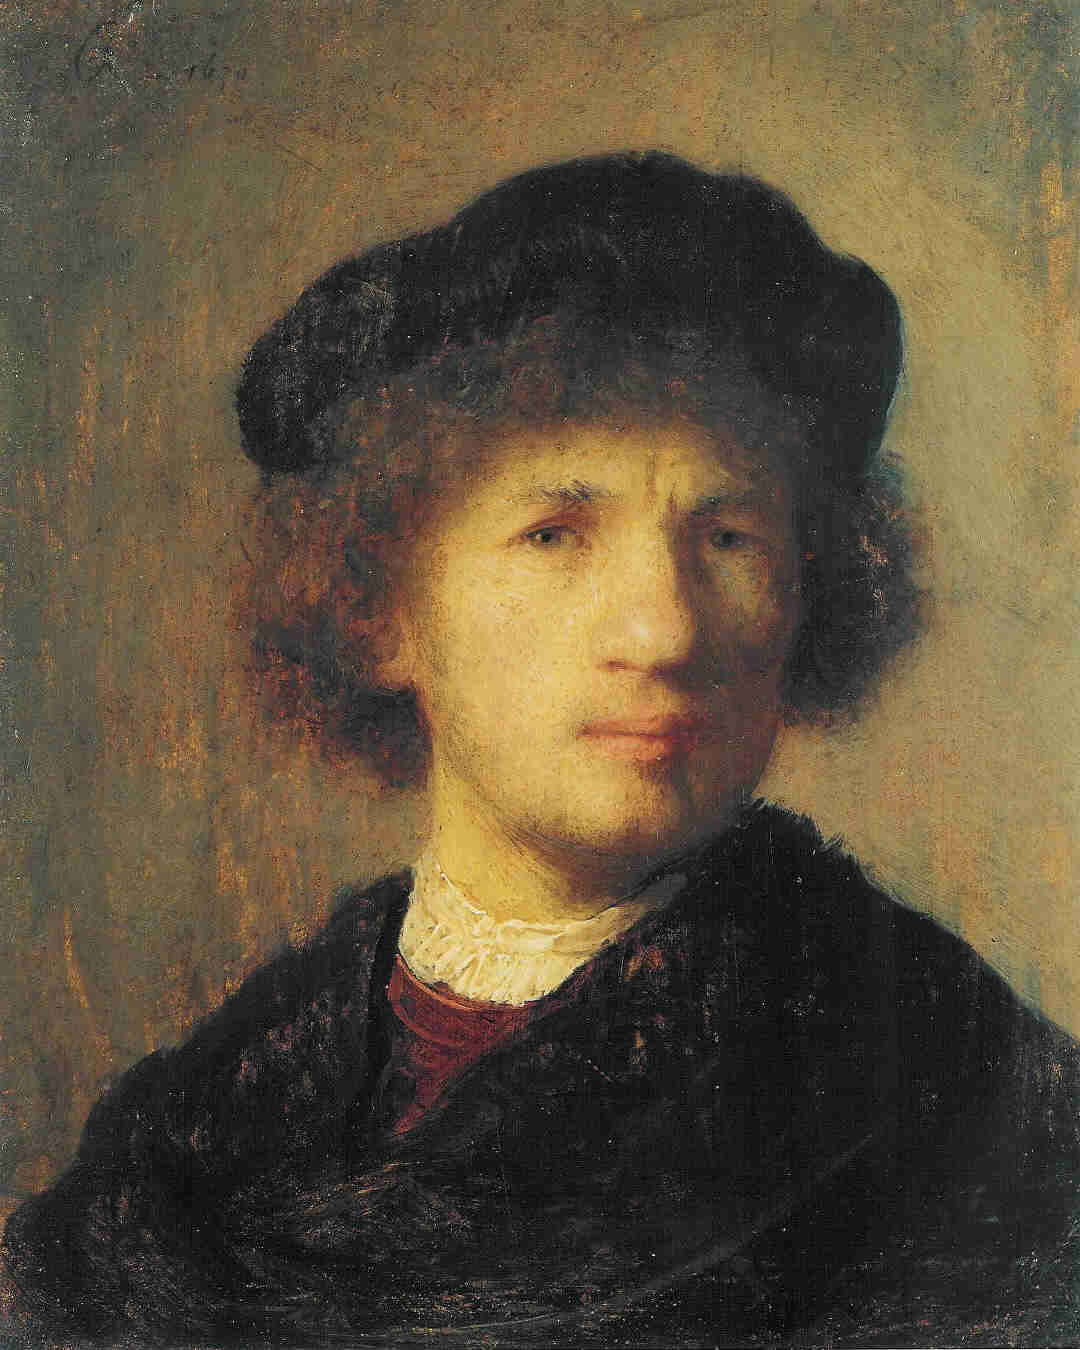 Self-Portrait (1630) by Rembrandt van Rijn, one of the works stolen in the 2000 robbery of Sweden’s National Museum